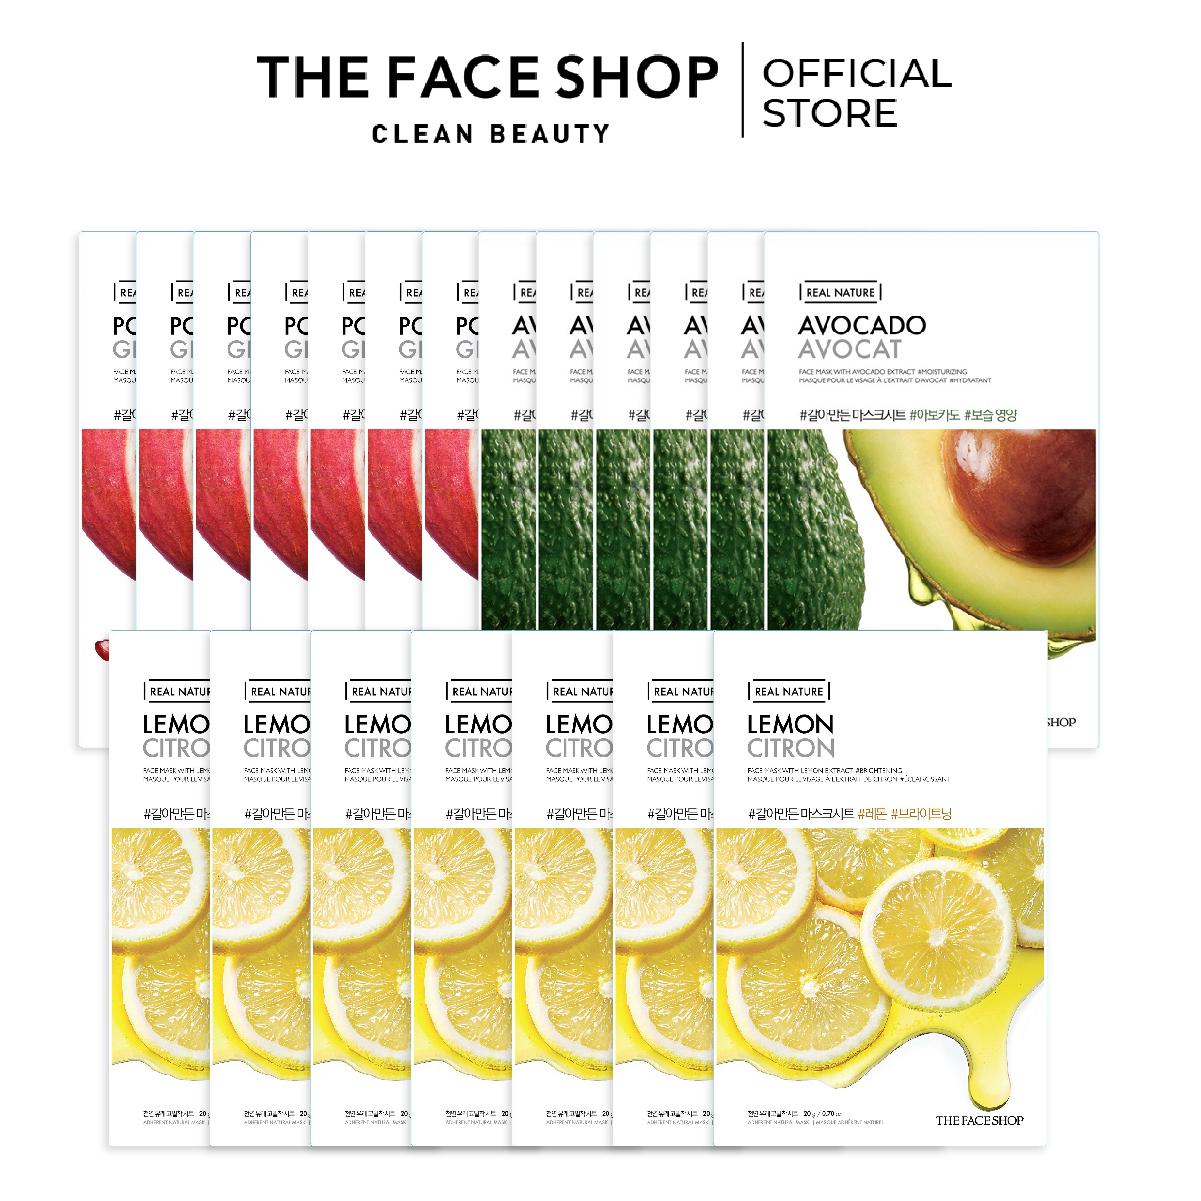 Combo 20 Mặt Nạ Real Nature Dưỡng Da THE FACE SHOP 20g 